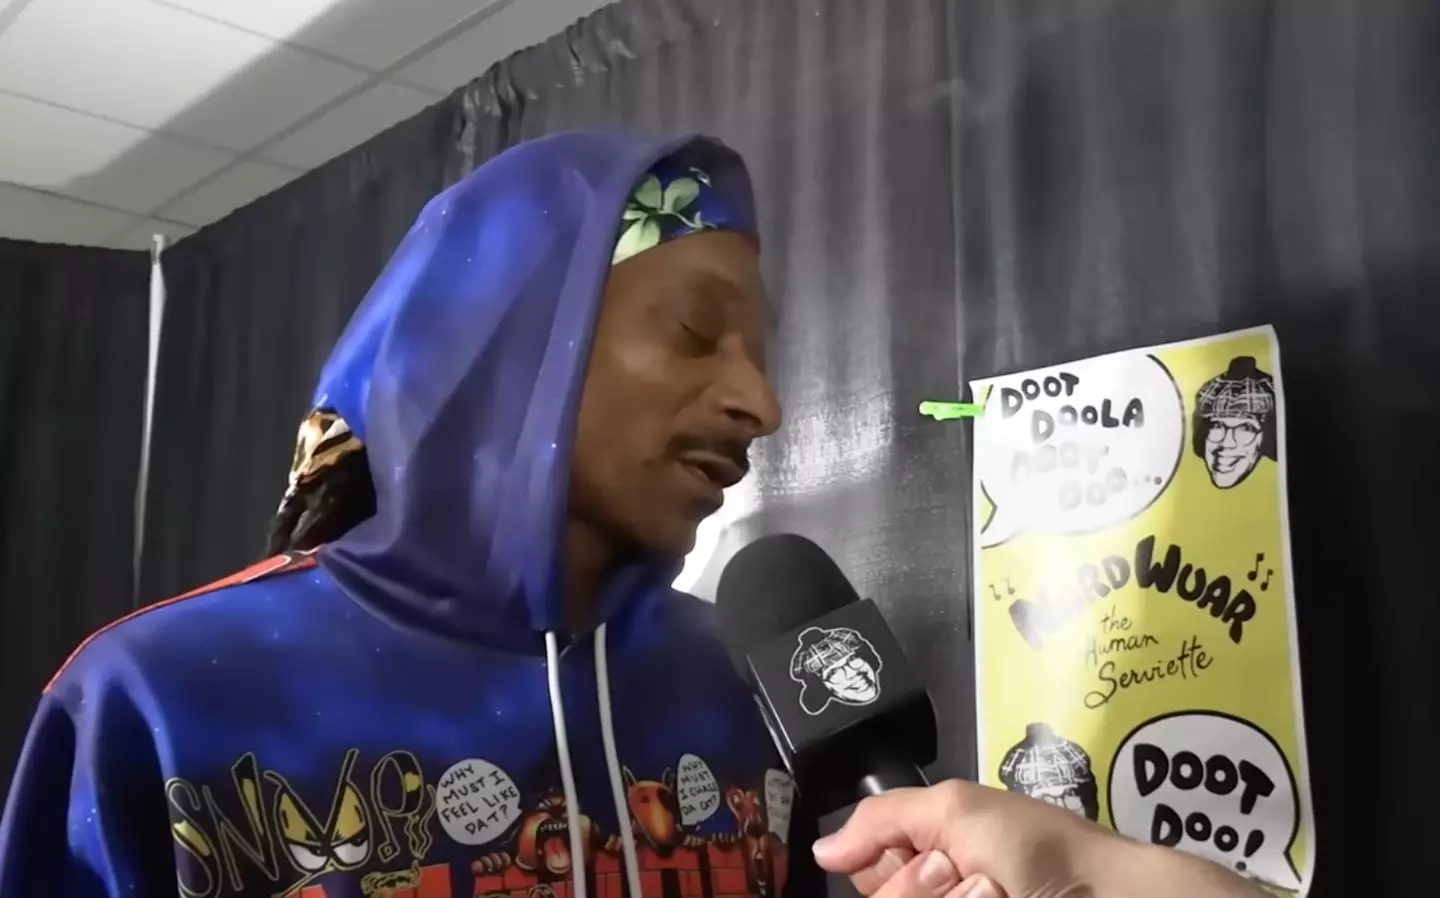 Snoop called the cockroach 'The Gooch'.